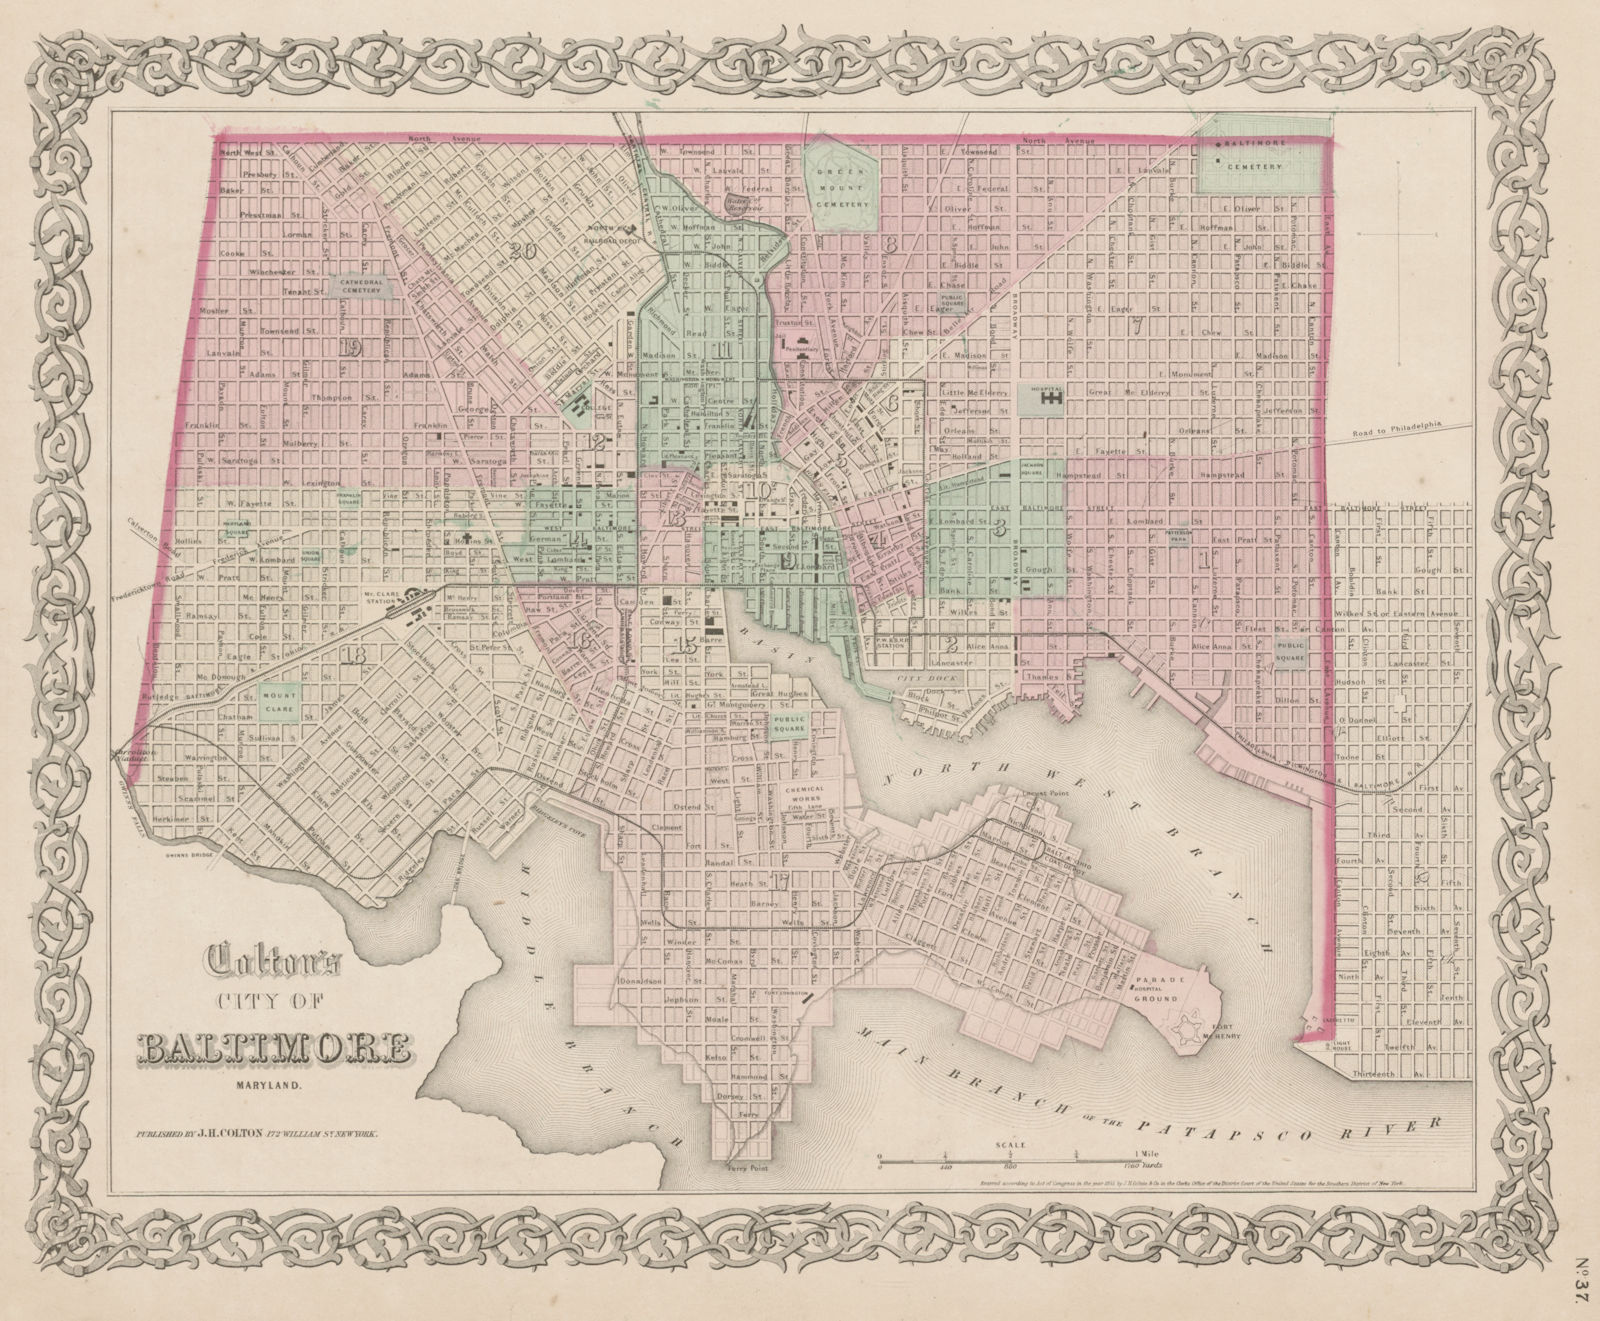 "Colton's City of Baltimore, Maryland". Decorative antique city plan 1863 map